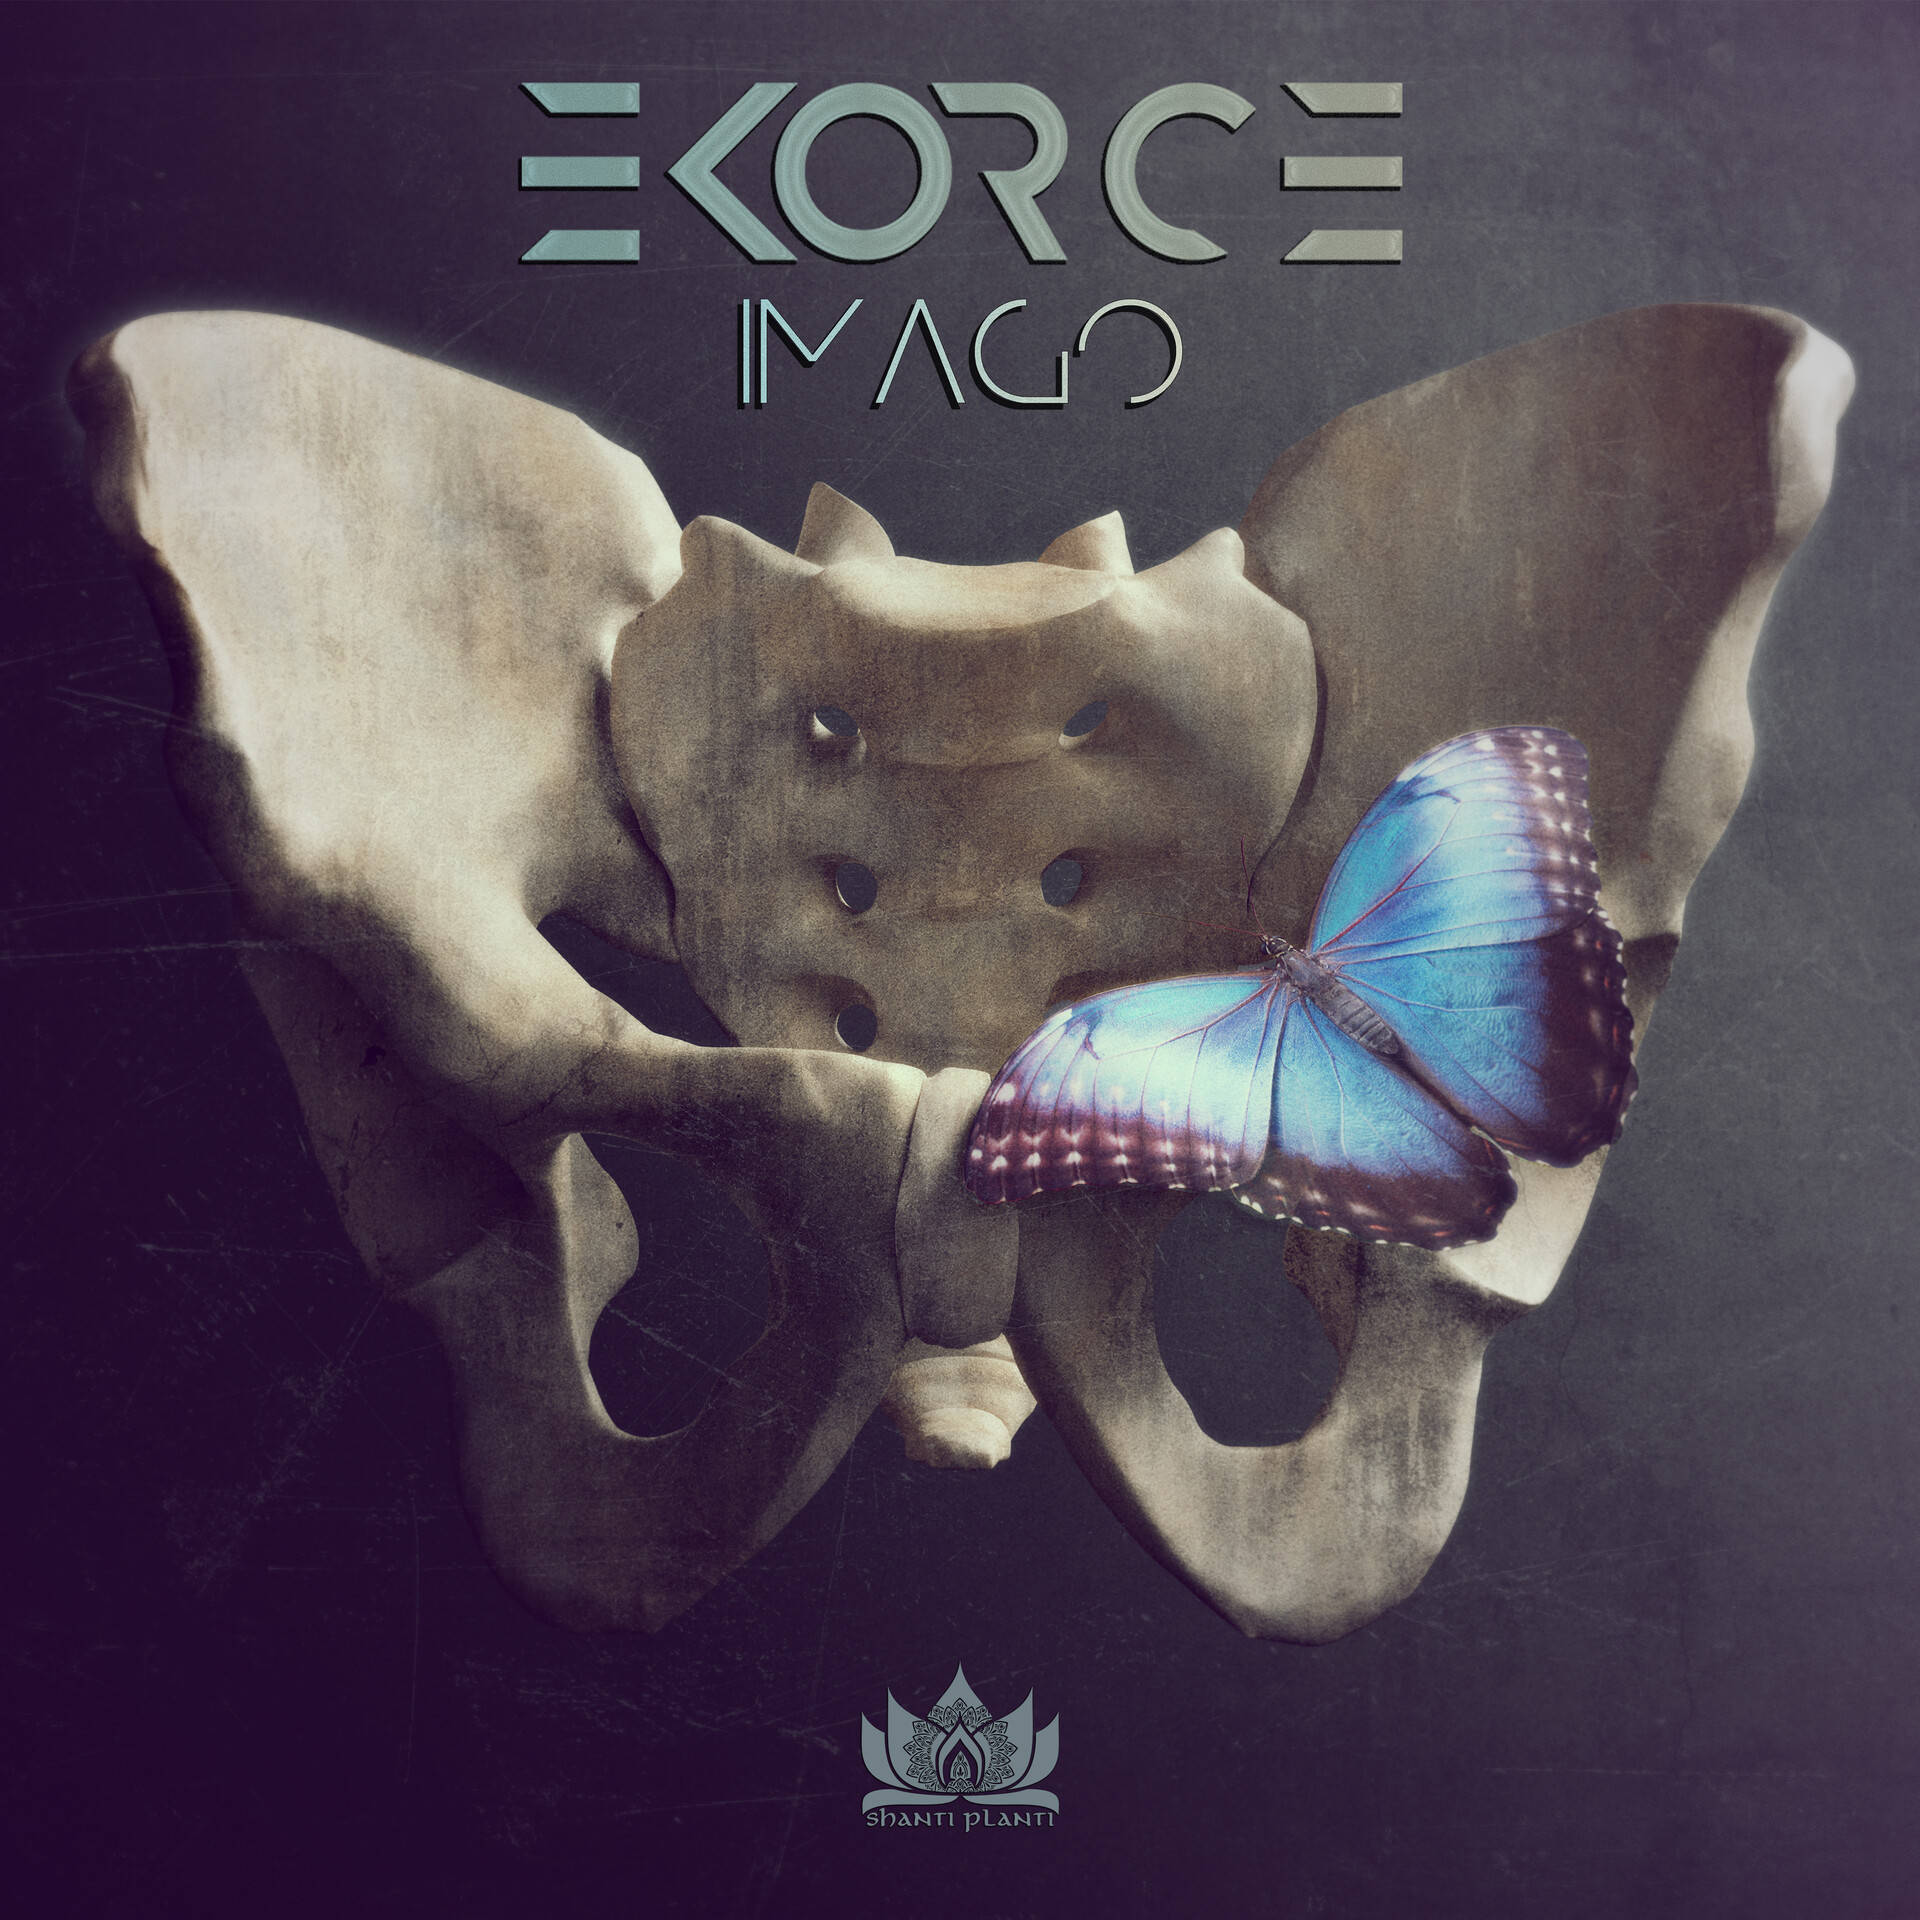 Cover art for music EP "Imago" by Ekore